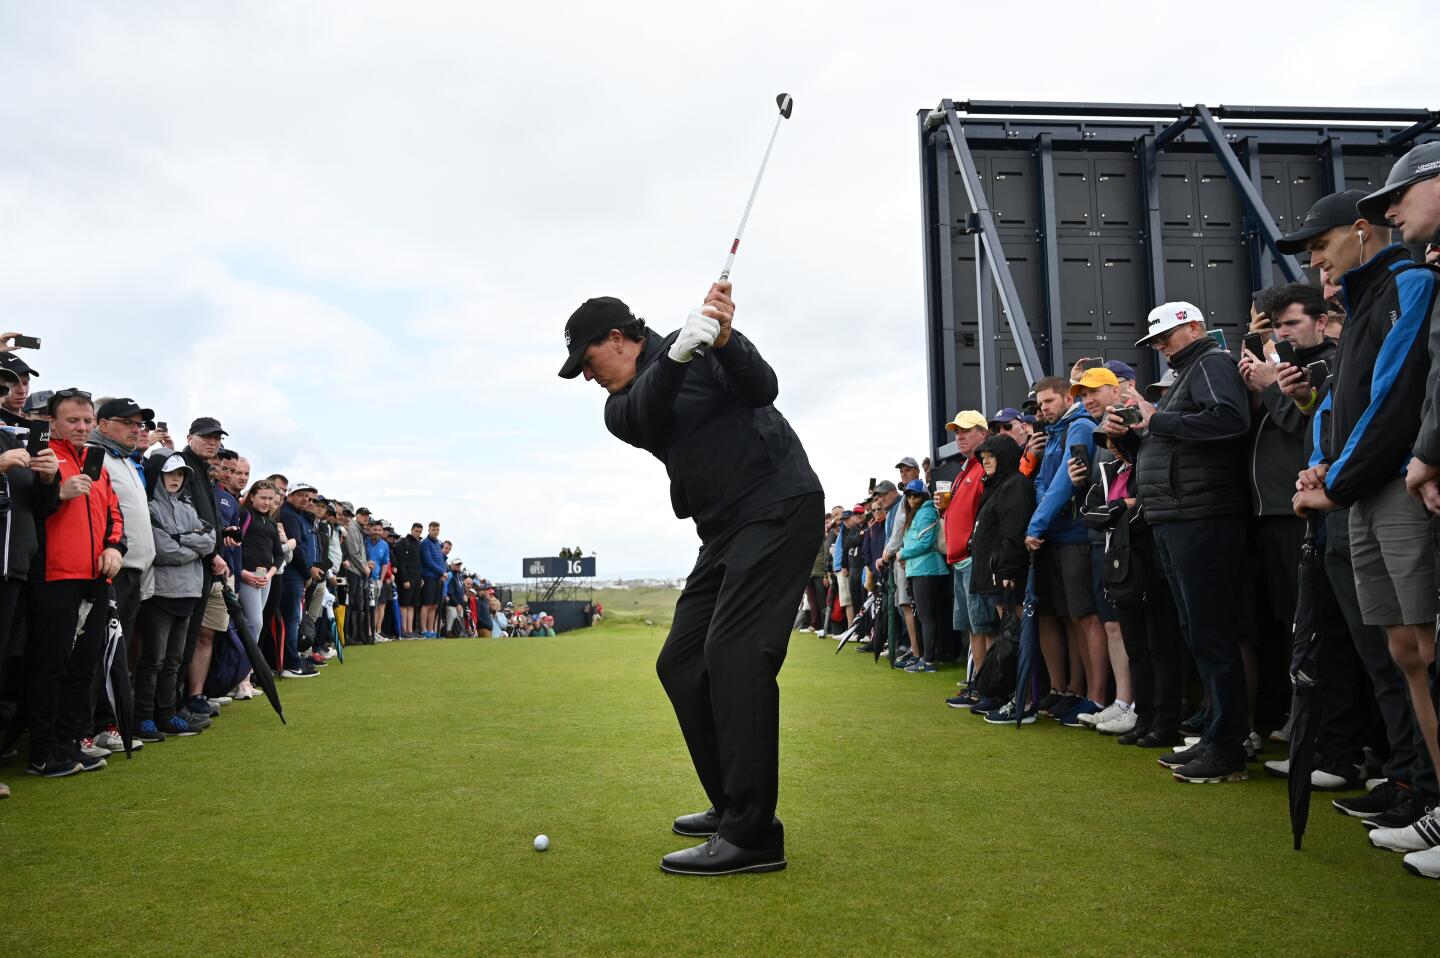 Phil Mickelson plays a shot after missing the green on the 16th hole during the first round of the 148th Open Championship at Royal Portrush Golf Club in Northern Ireland. Mickelson bogeyed the par-three and shot five-over 76.